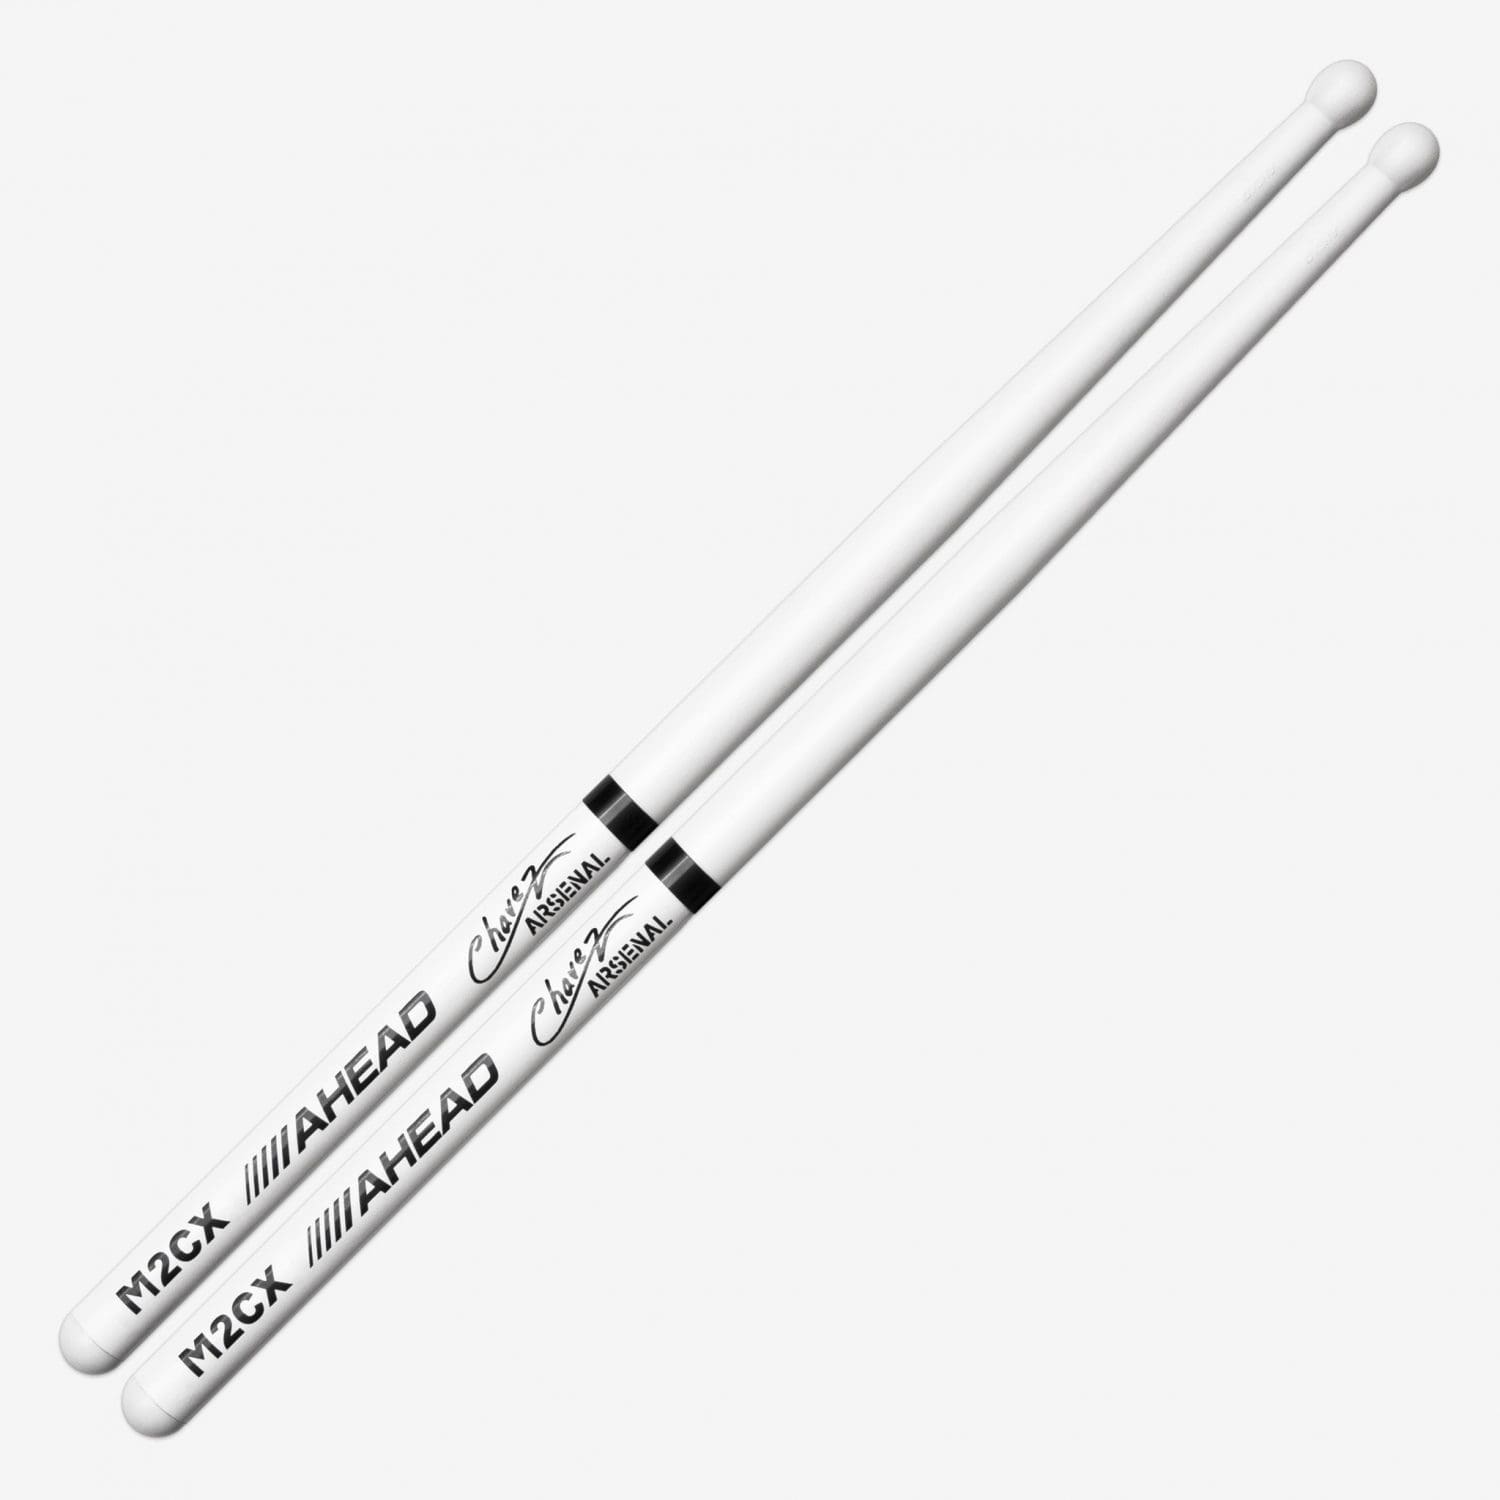 SDC M2CX Marching Drumsticks